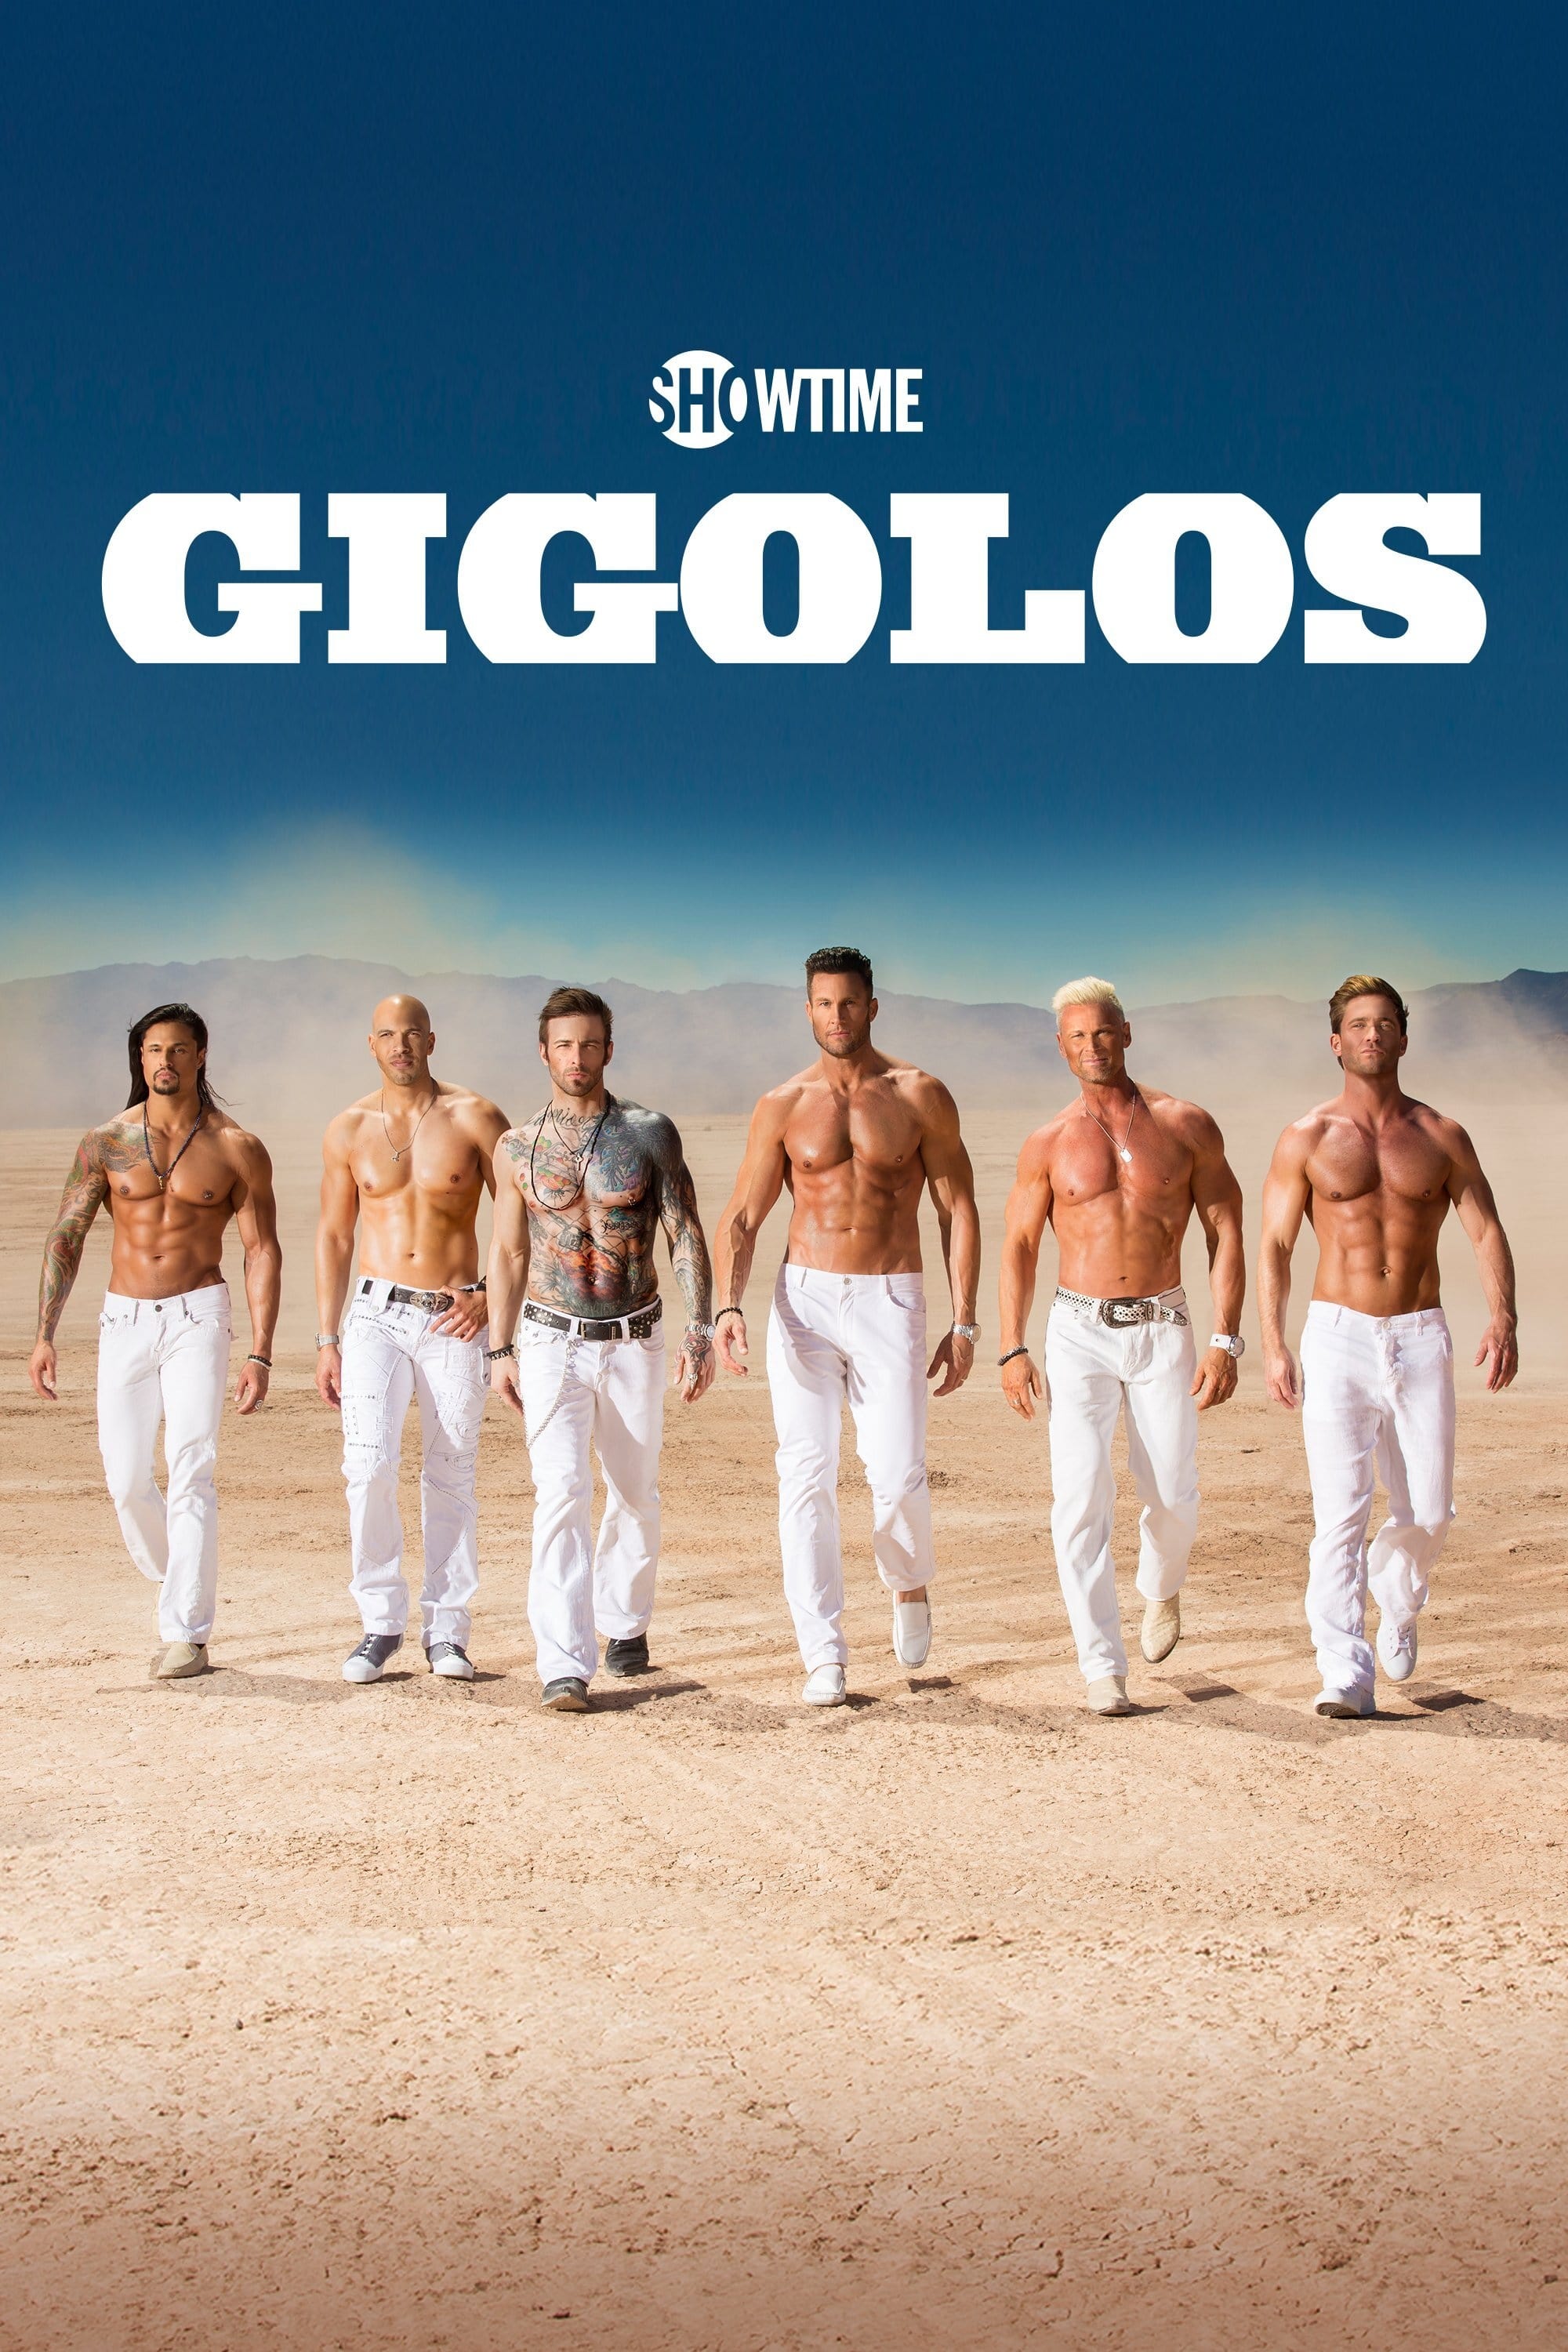 damion collier recommends showtime gigolos watch online pic